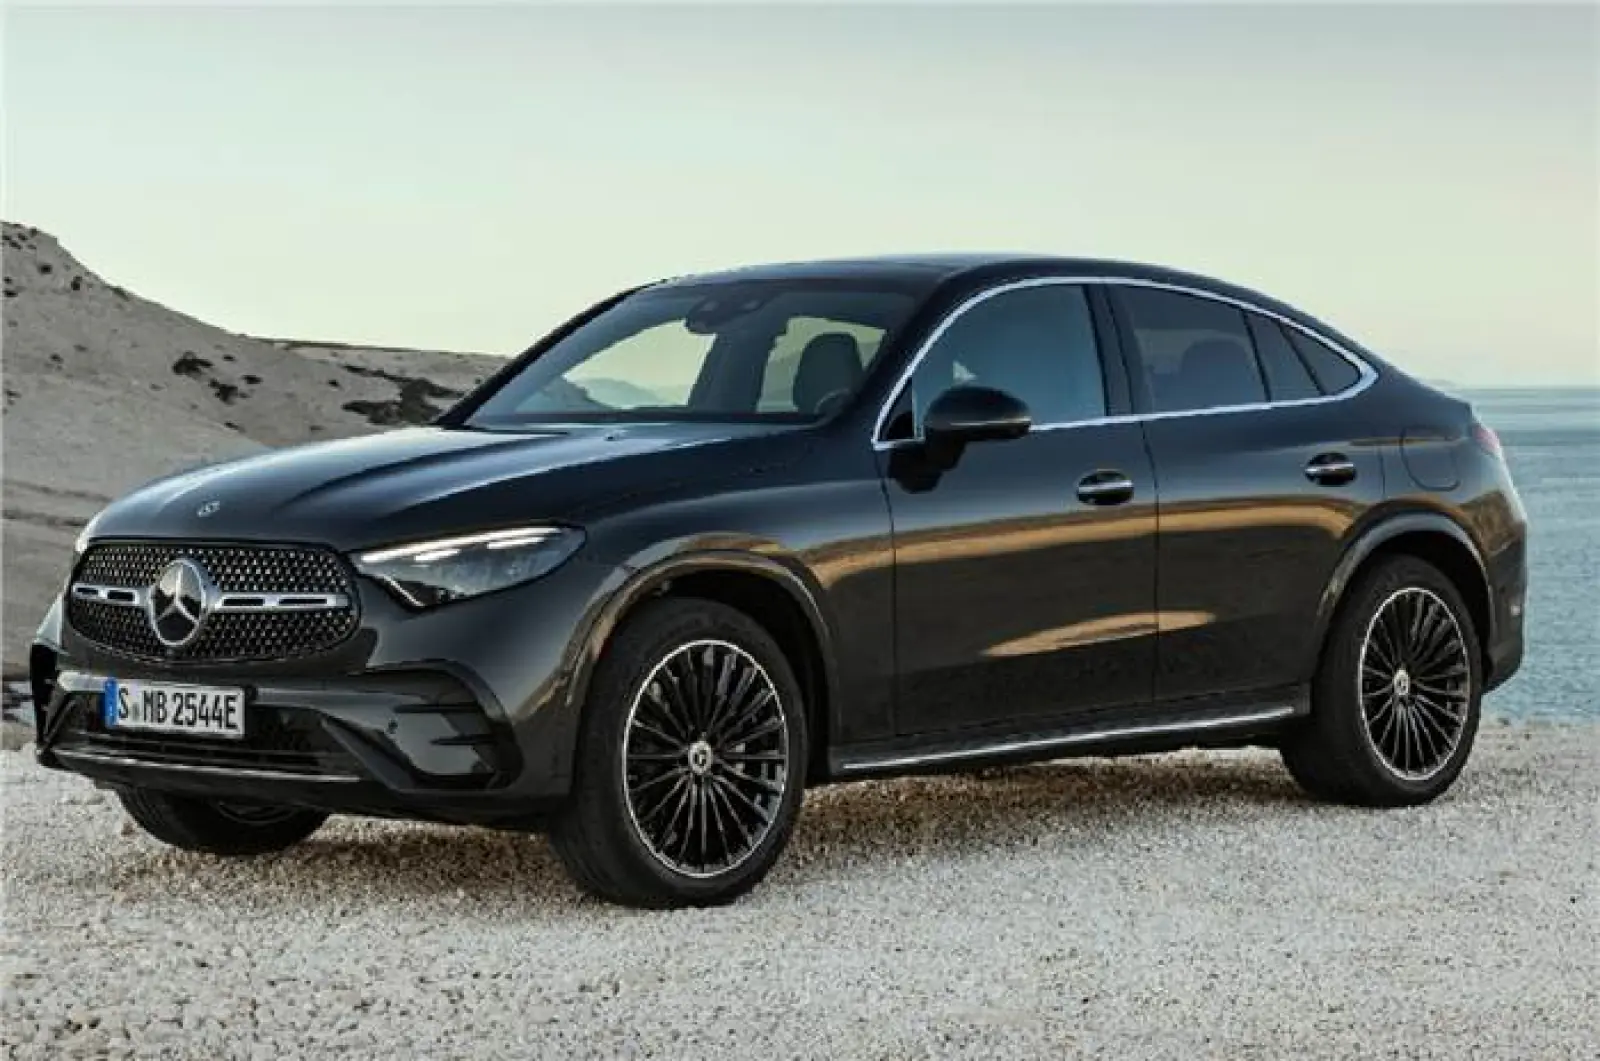 Mercedes-Benz GLC gets Plug-in Variant, know how much has changed from before and when will it be launched in India